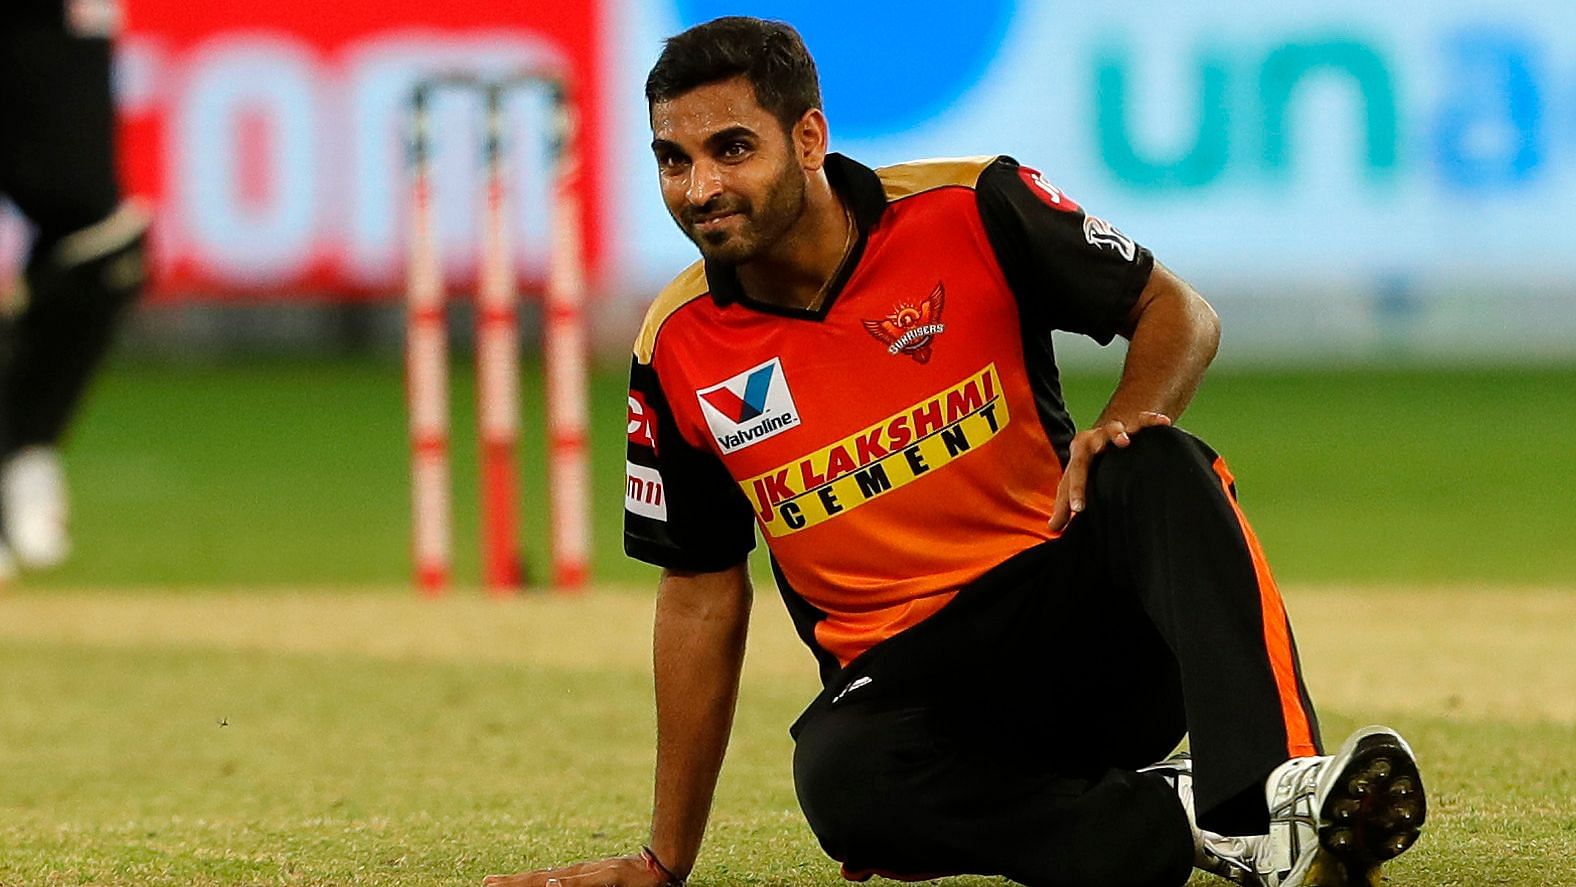 Sunrisers Hyderabad have confirmed Bhuvneshwar Kumar has been ruled out of IPL 2020.